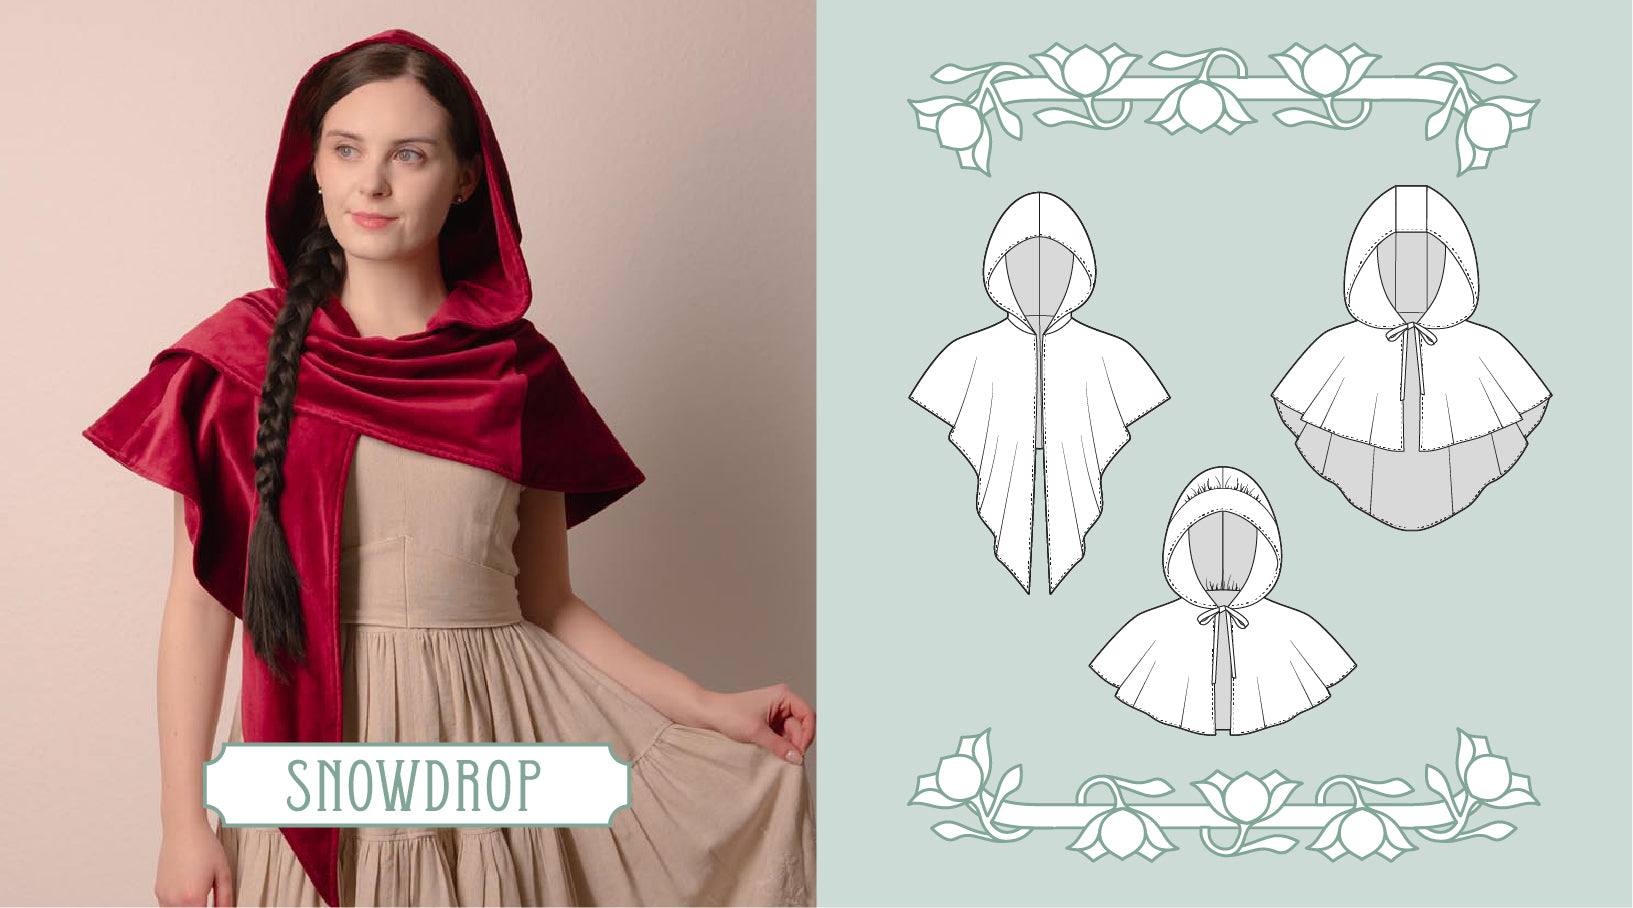 Meet Snowdrop - Our red riding hood cape accessory sewing pattern